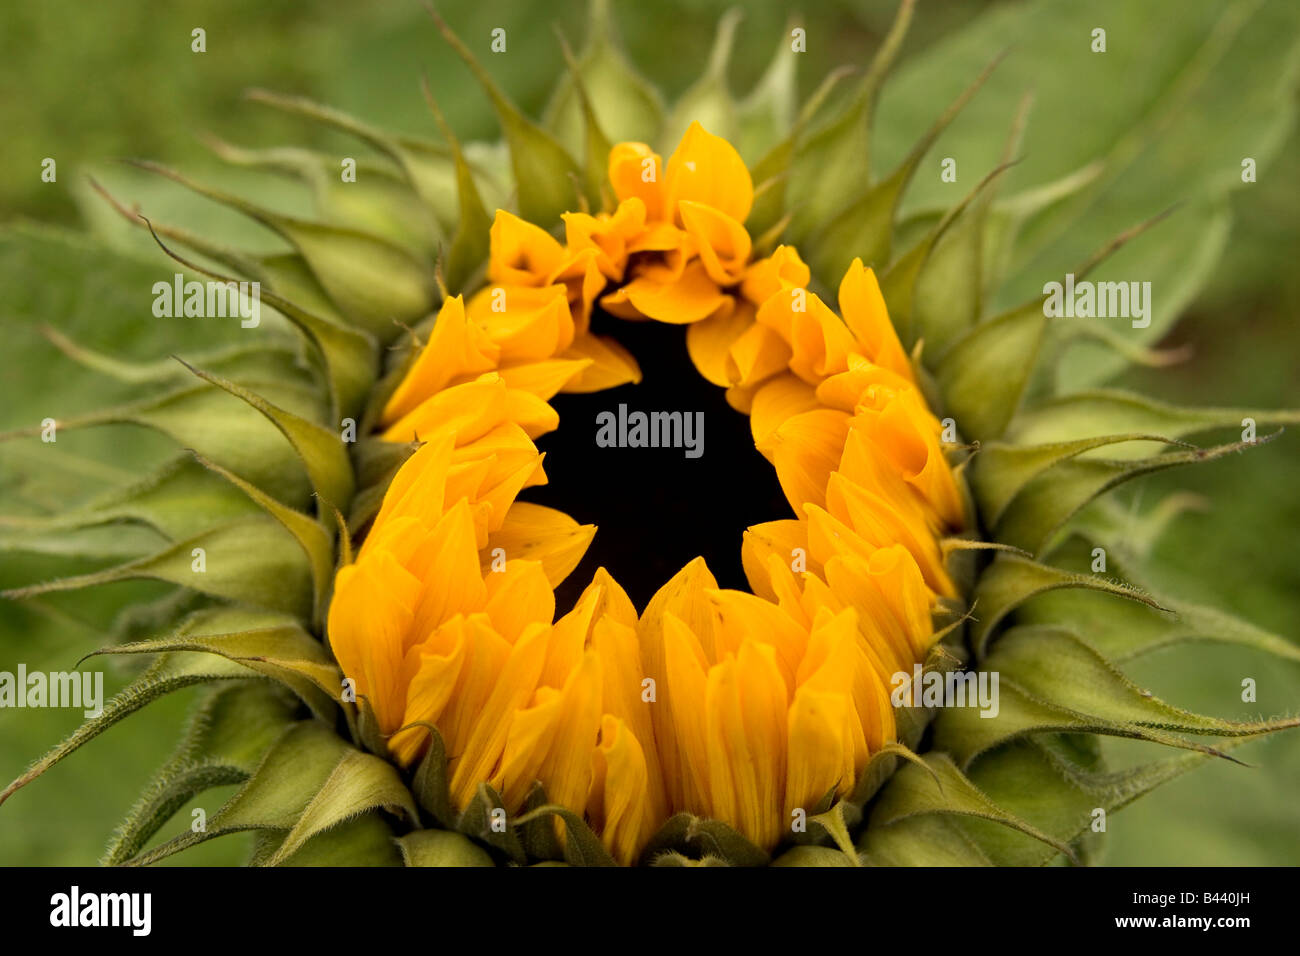 A close up of a sunflower Stock Photo